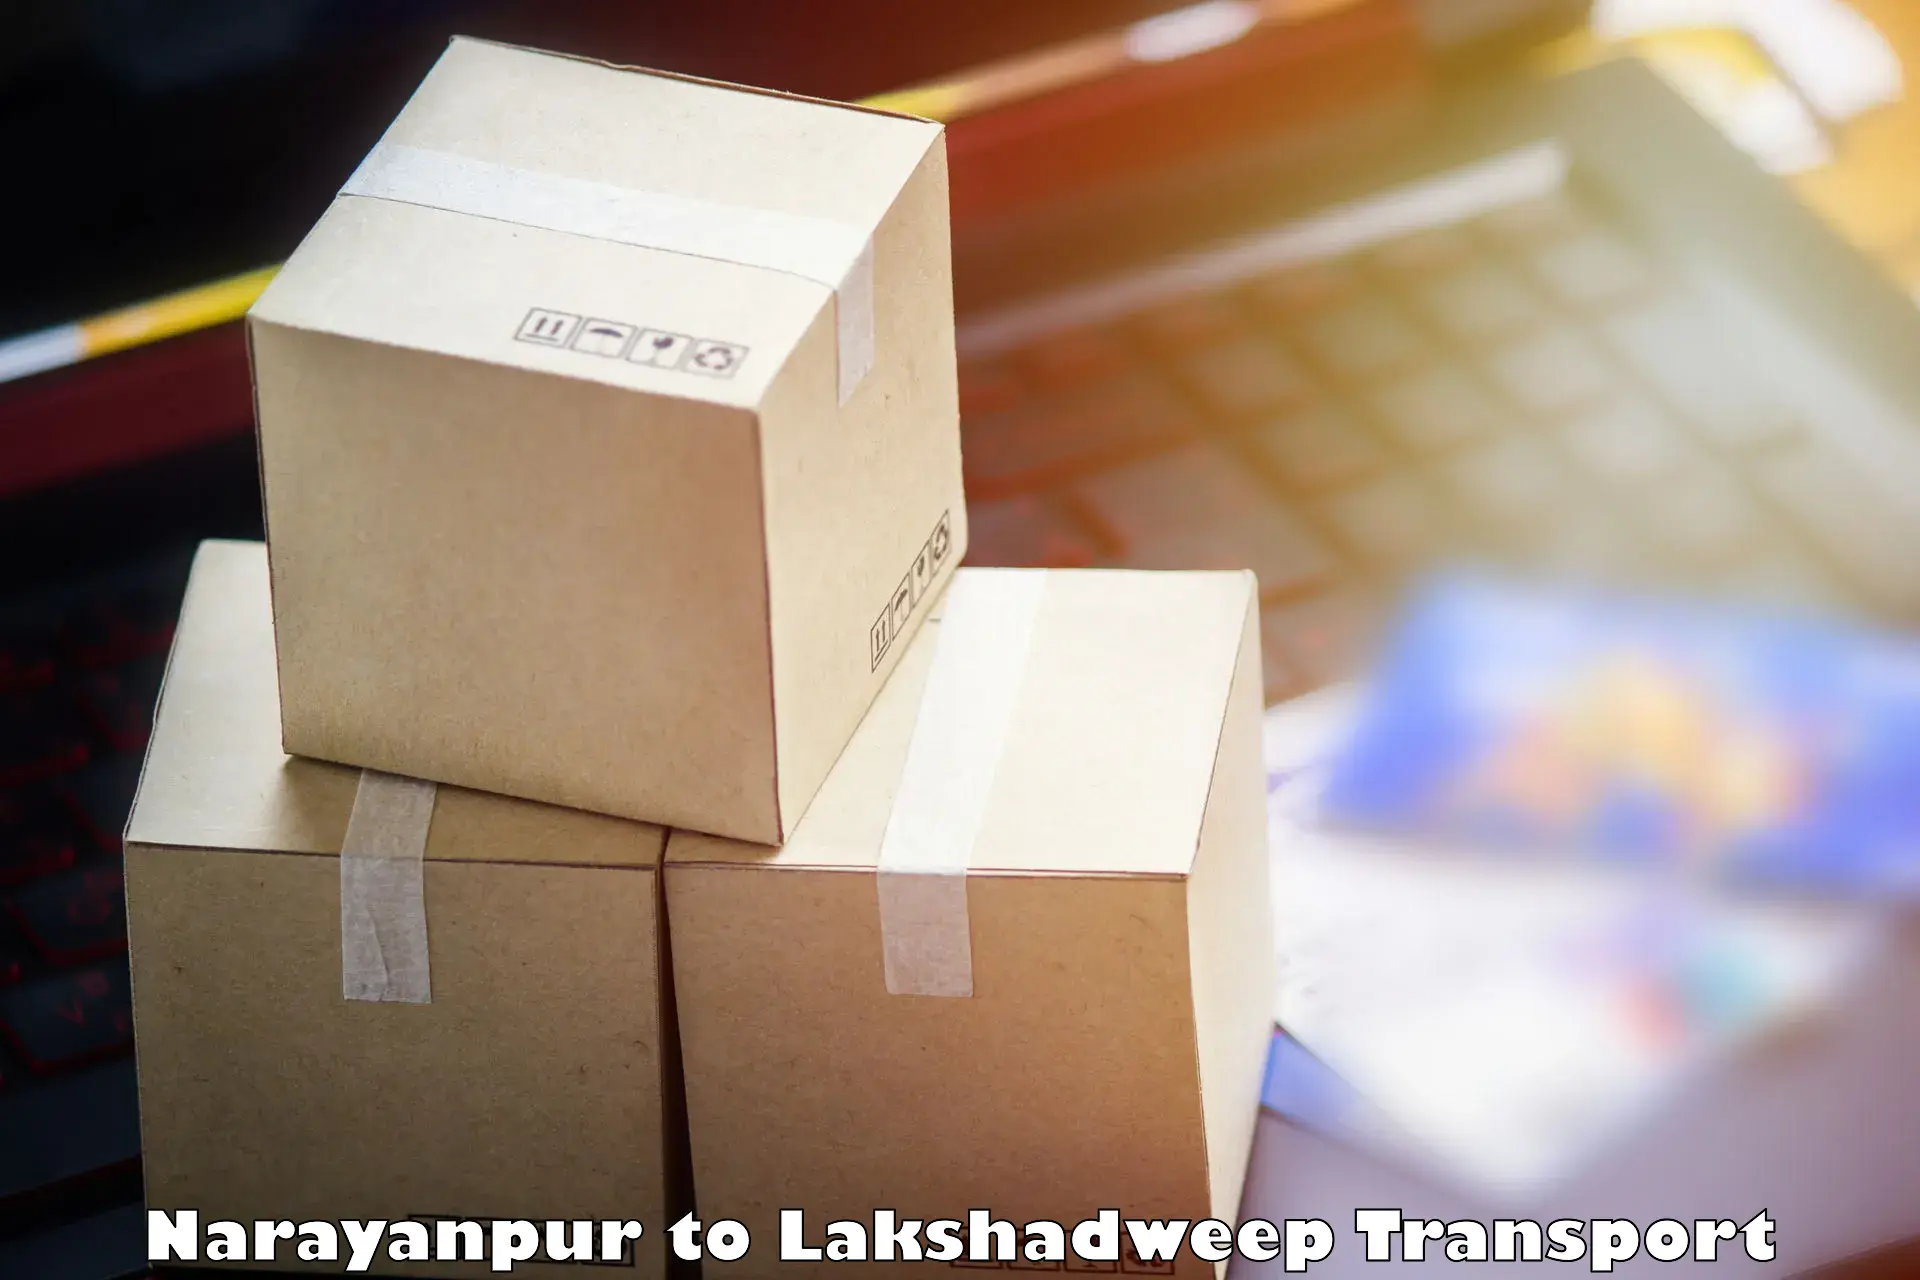 Nearby transport service Narayanpur to Lakshadweep